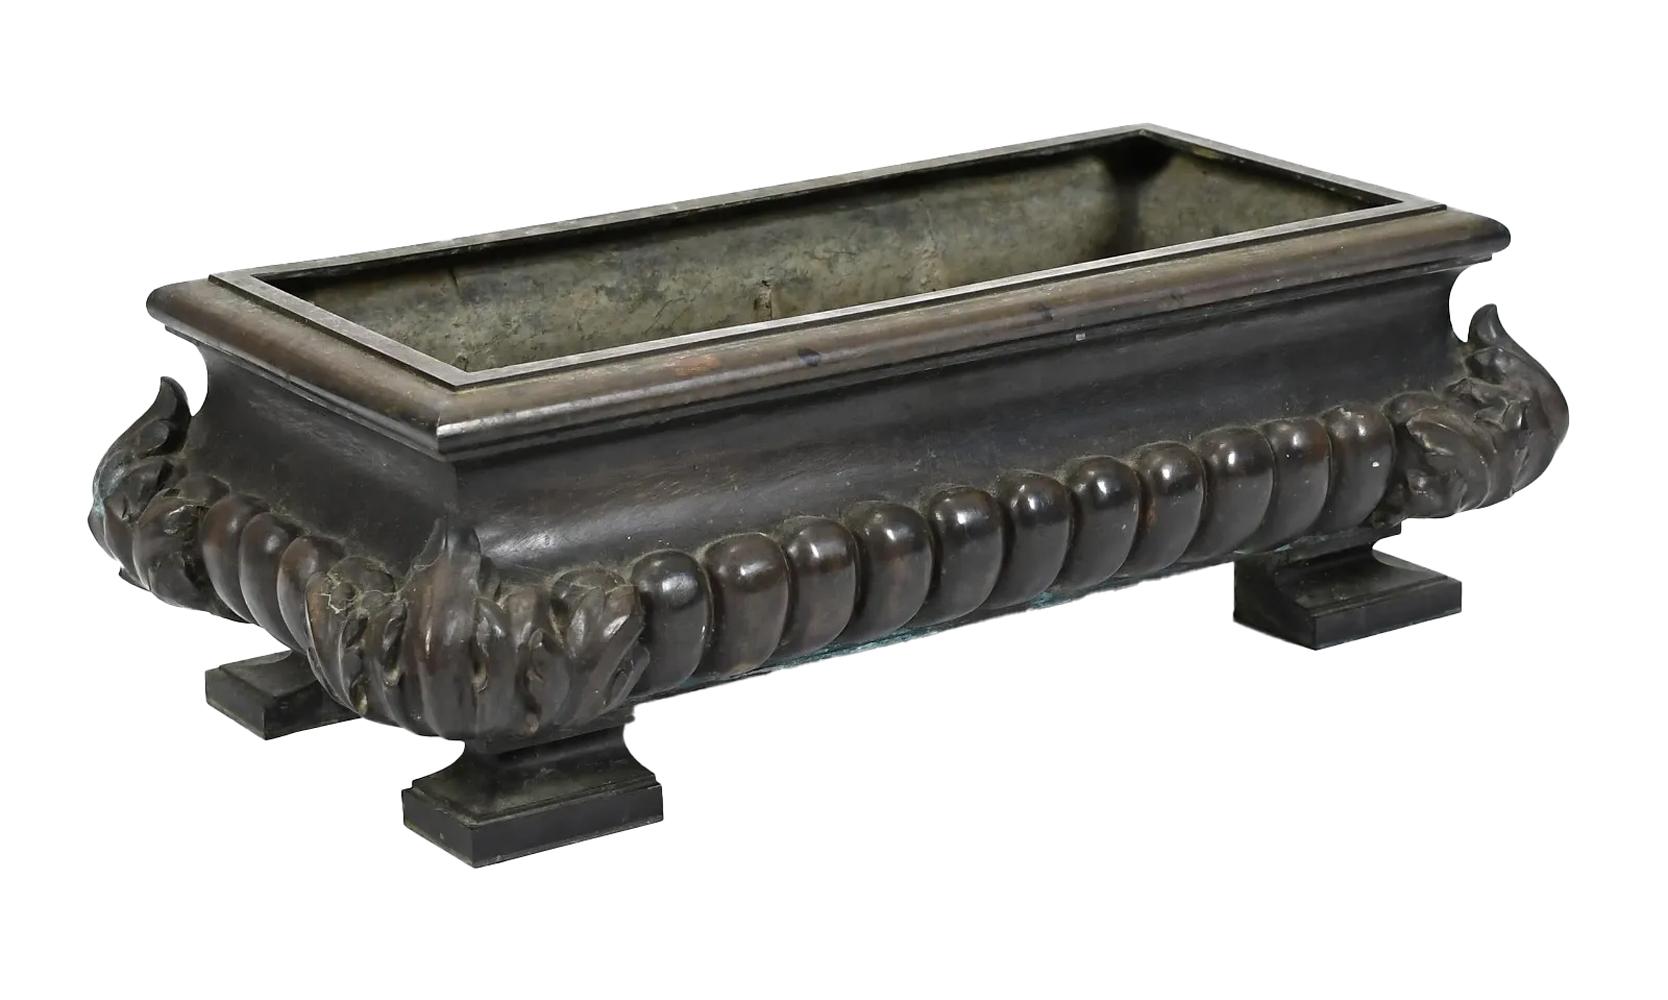 19th Century Neoclassical heavy patinated cast bronze planter of large scale having gadrooned bombe sides with acanthus leaf corners raised on block feet. Suitable for indoor as well as outdoor use.